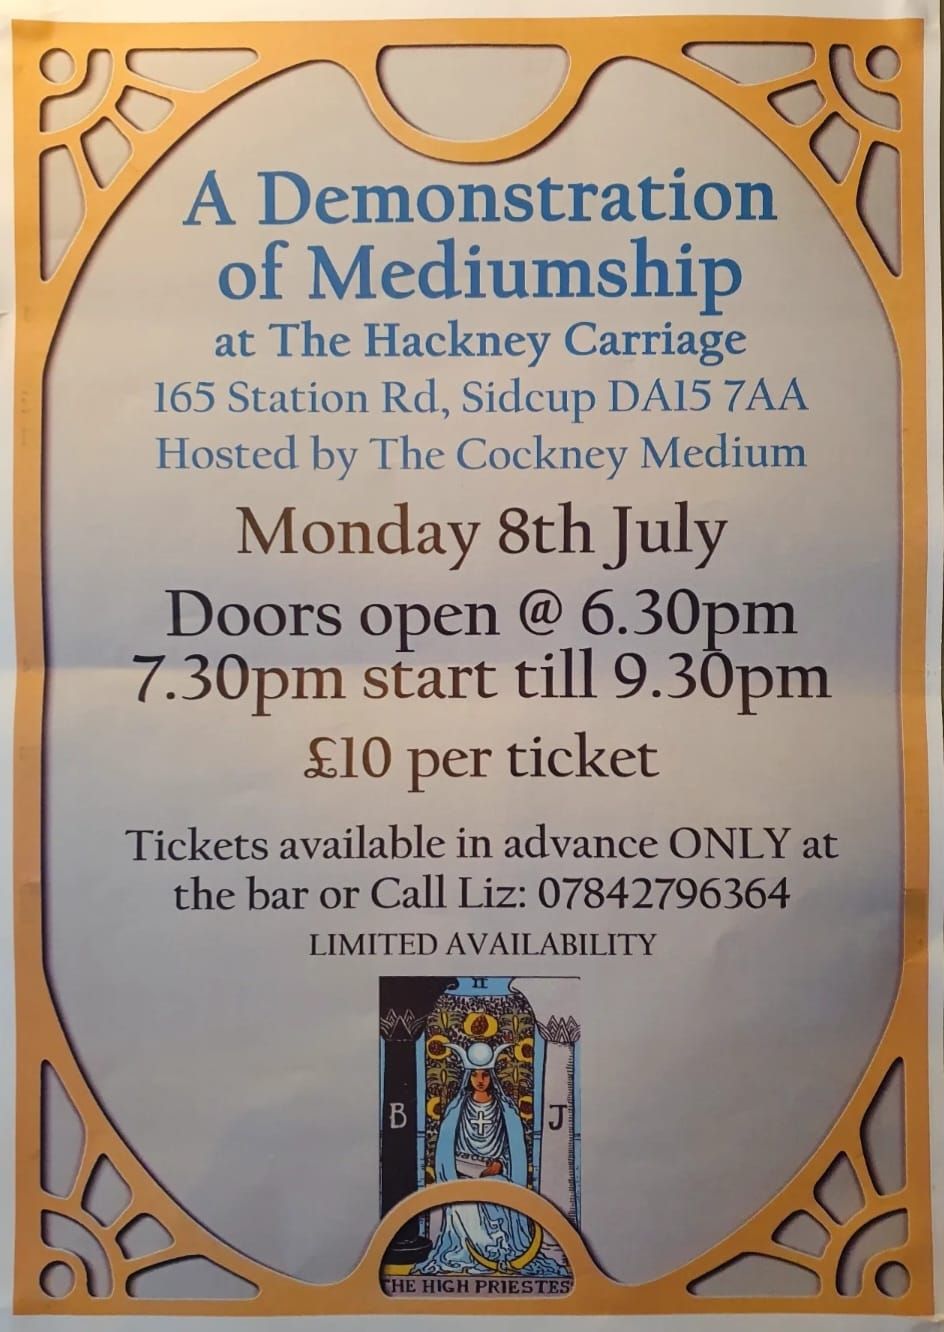 A DEMONSTRATION OF MEDIUMSHIP AT THE HACKNEY CARRIAGE.